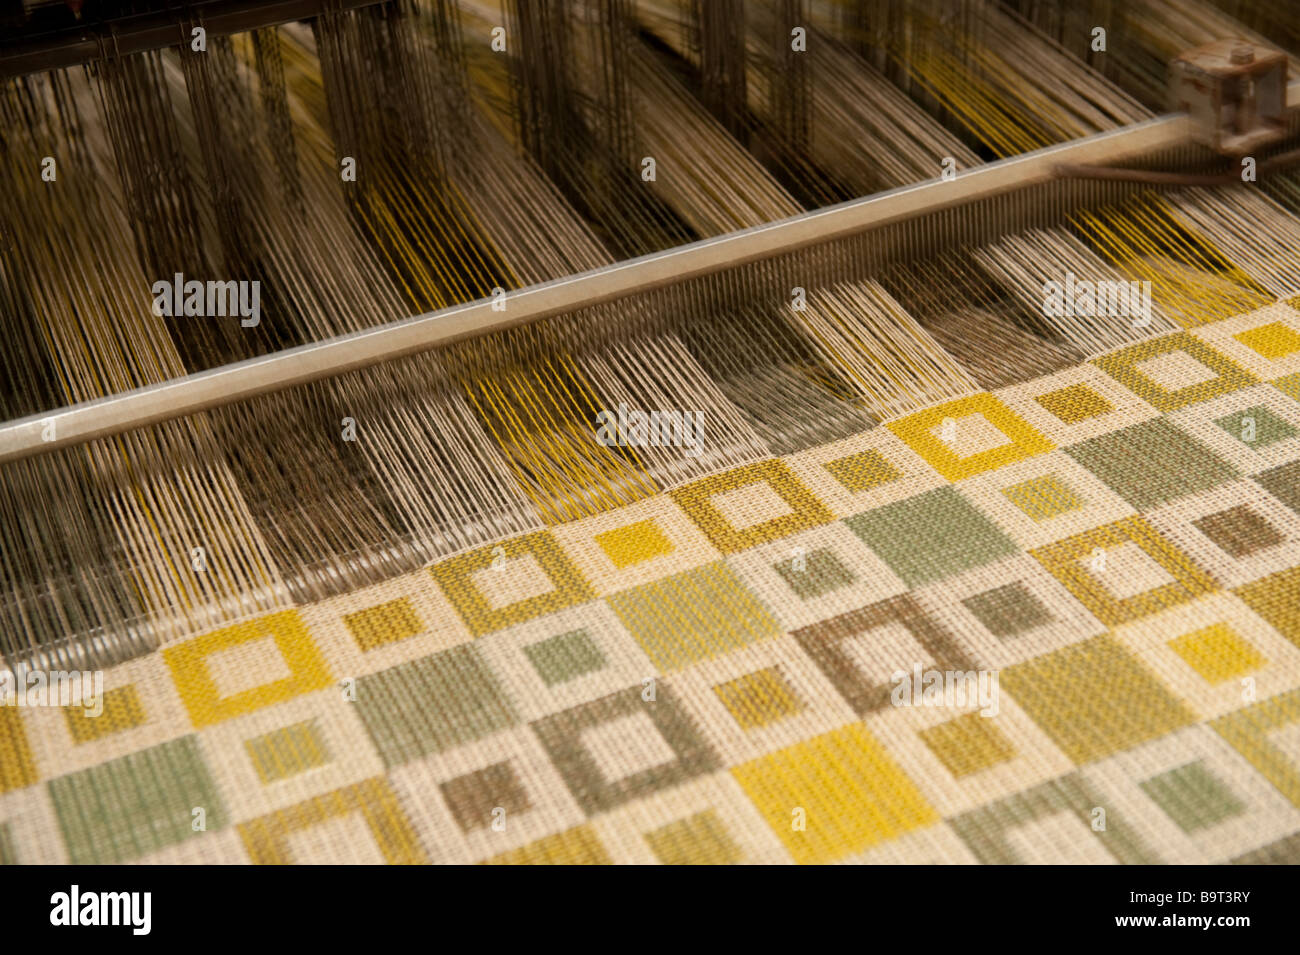 Woven fabric emerging from the loom at Melin Tregwynt welsh woollen mill Castlemorris Pembrokeshire wales UK Stock Photo